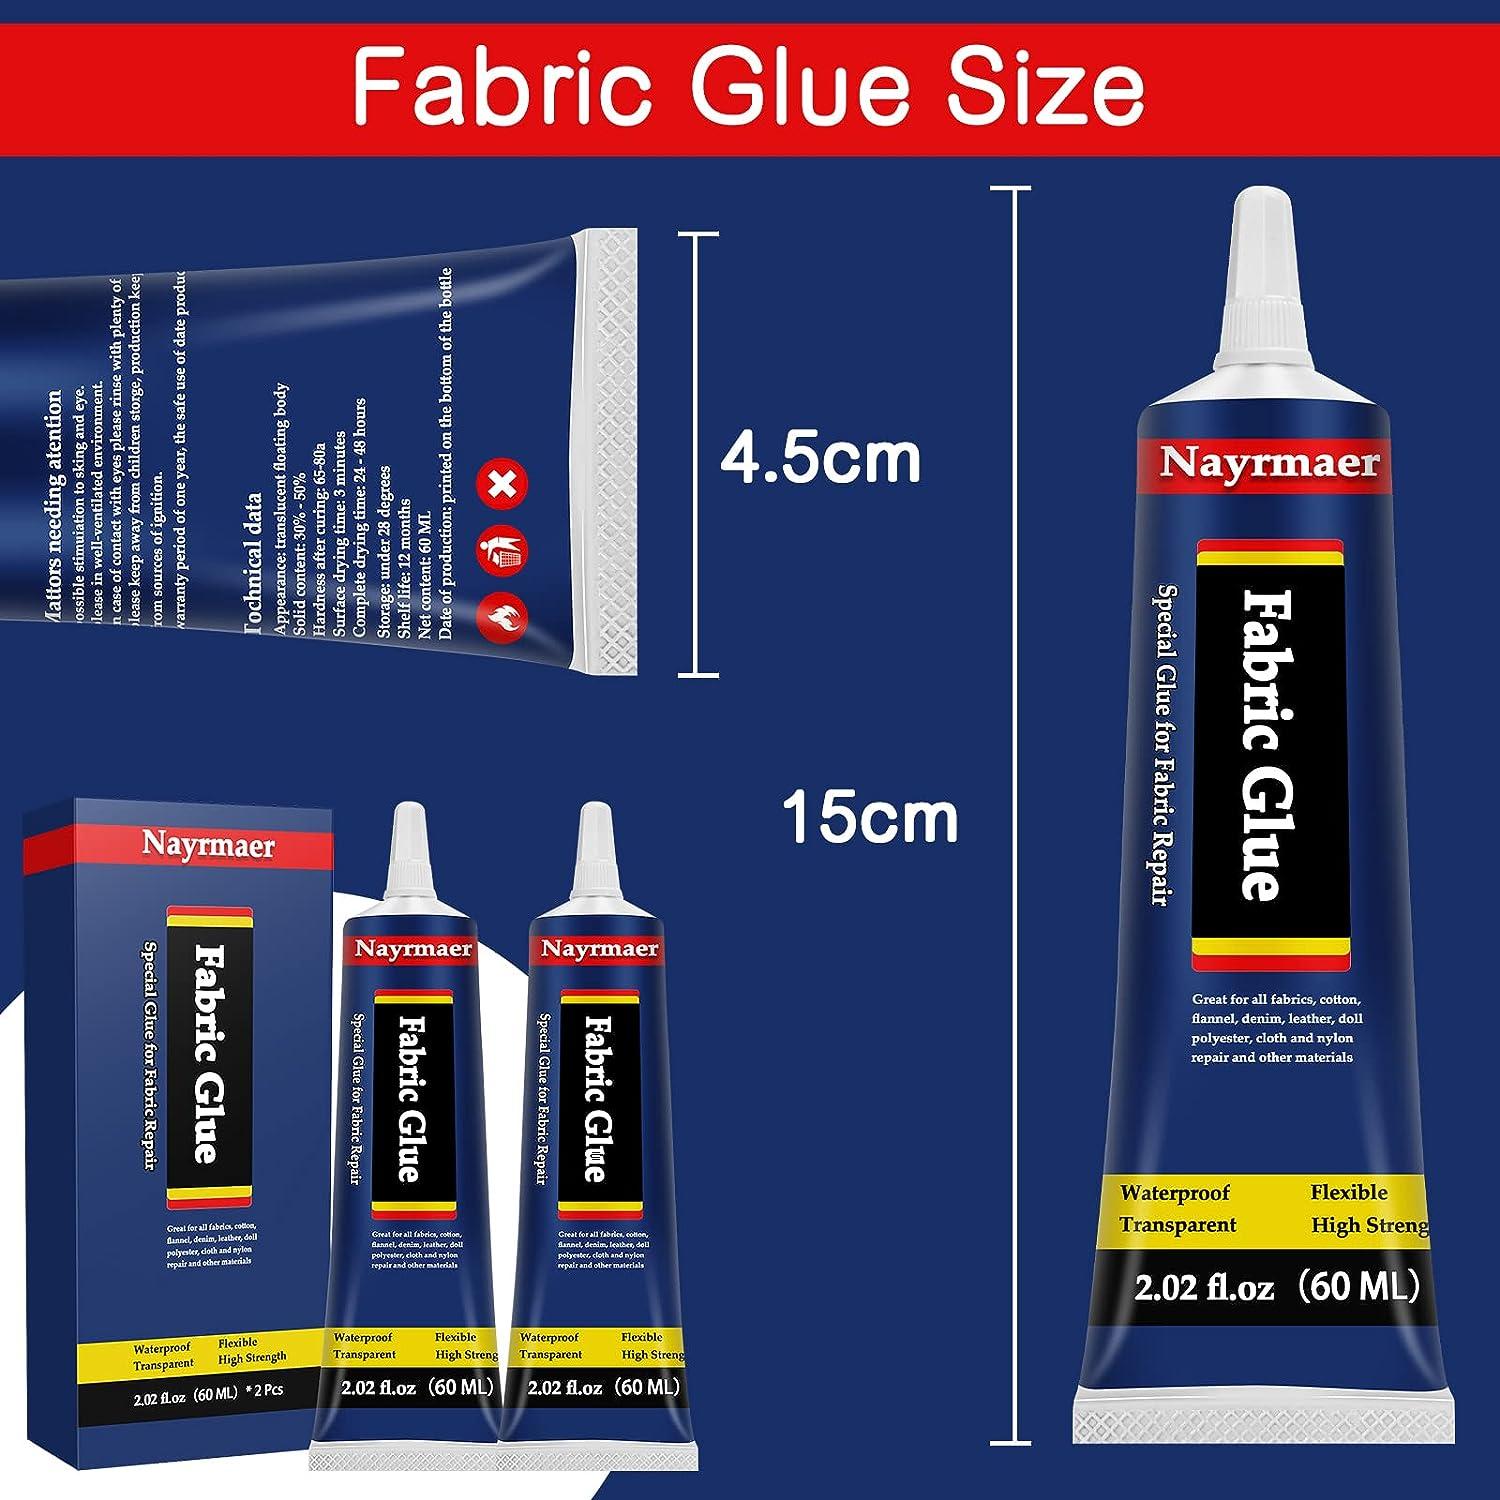 LEATHER AND FABRIC GLUE